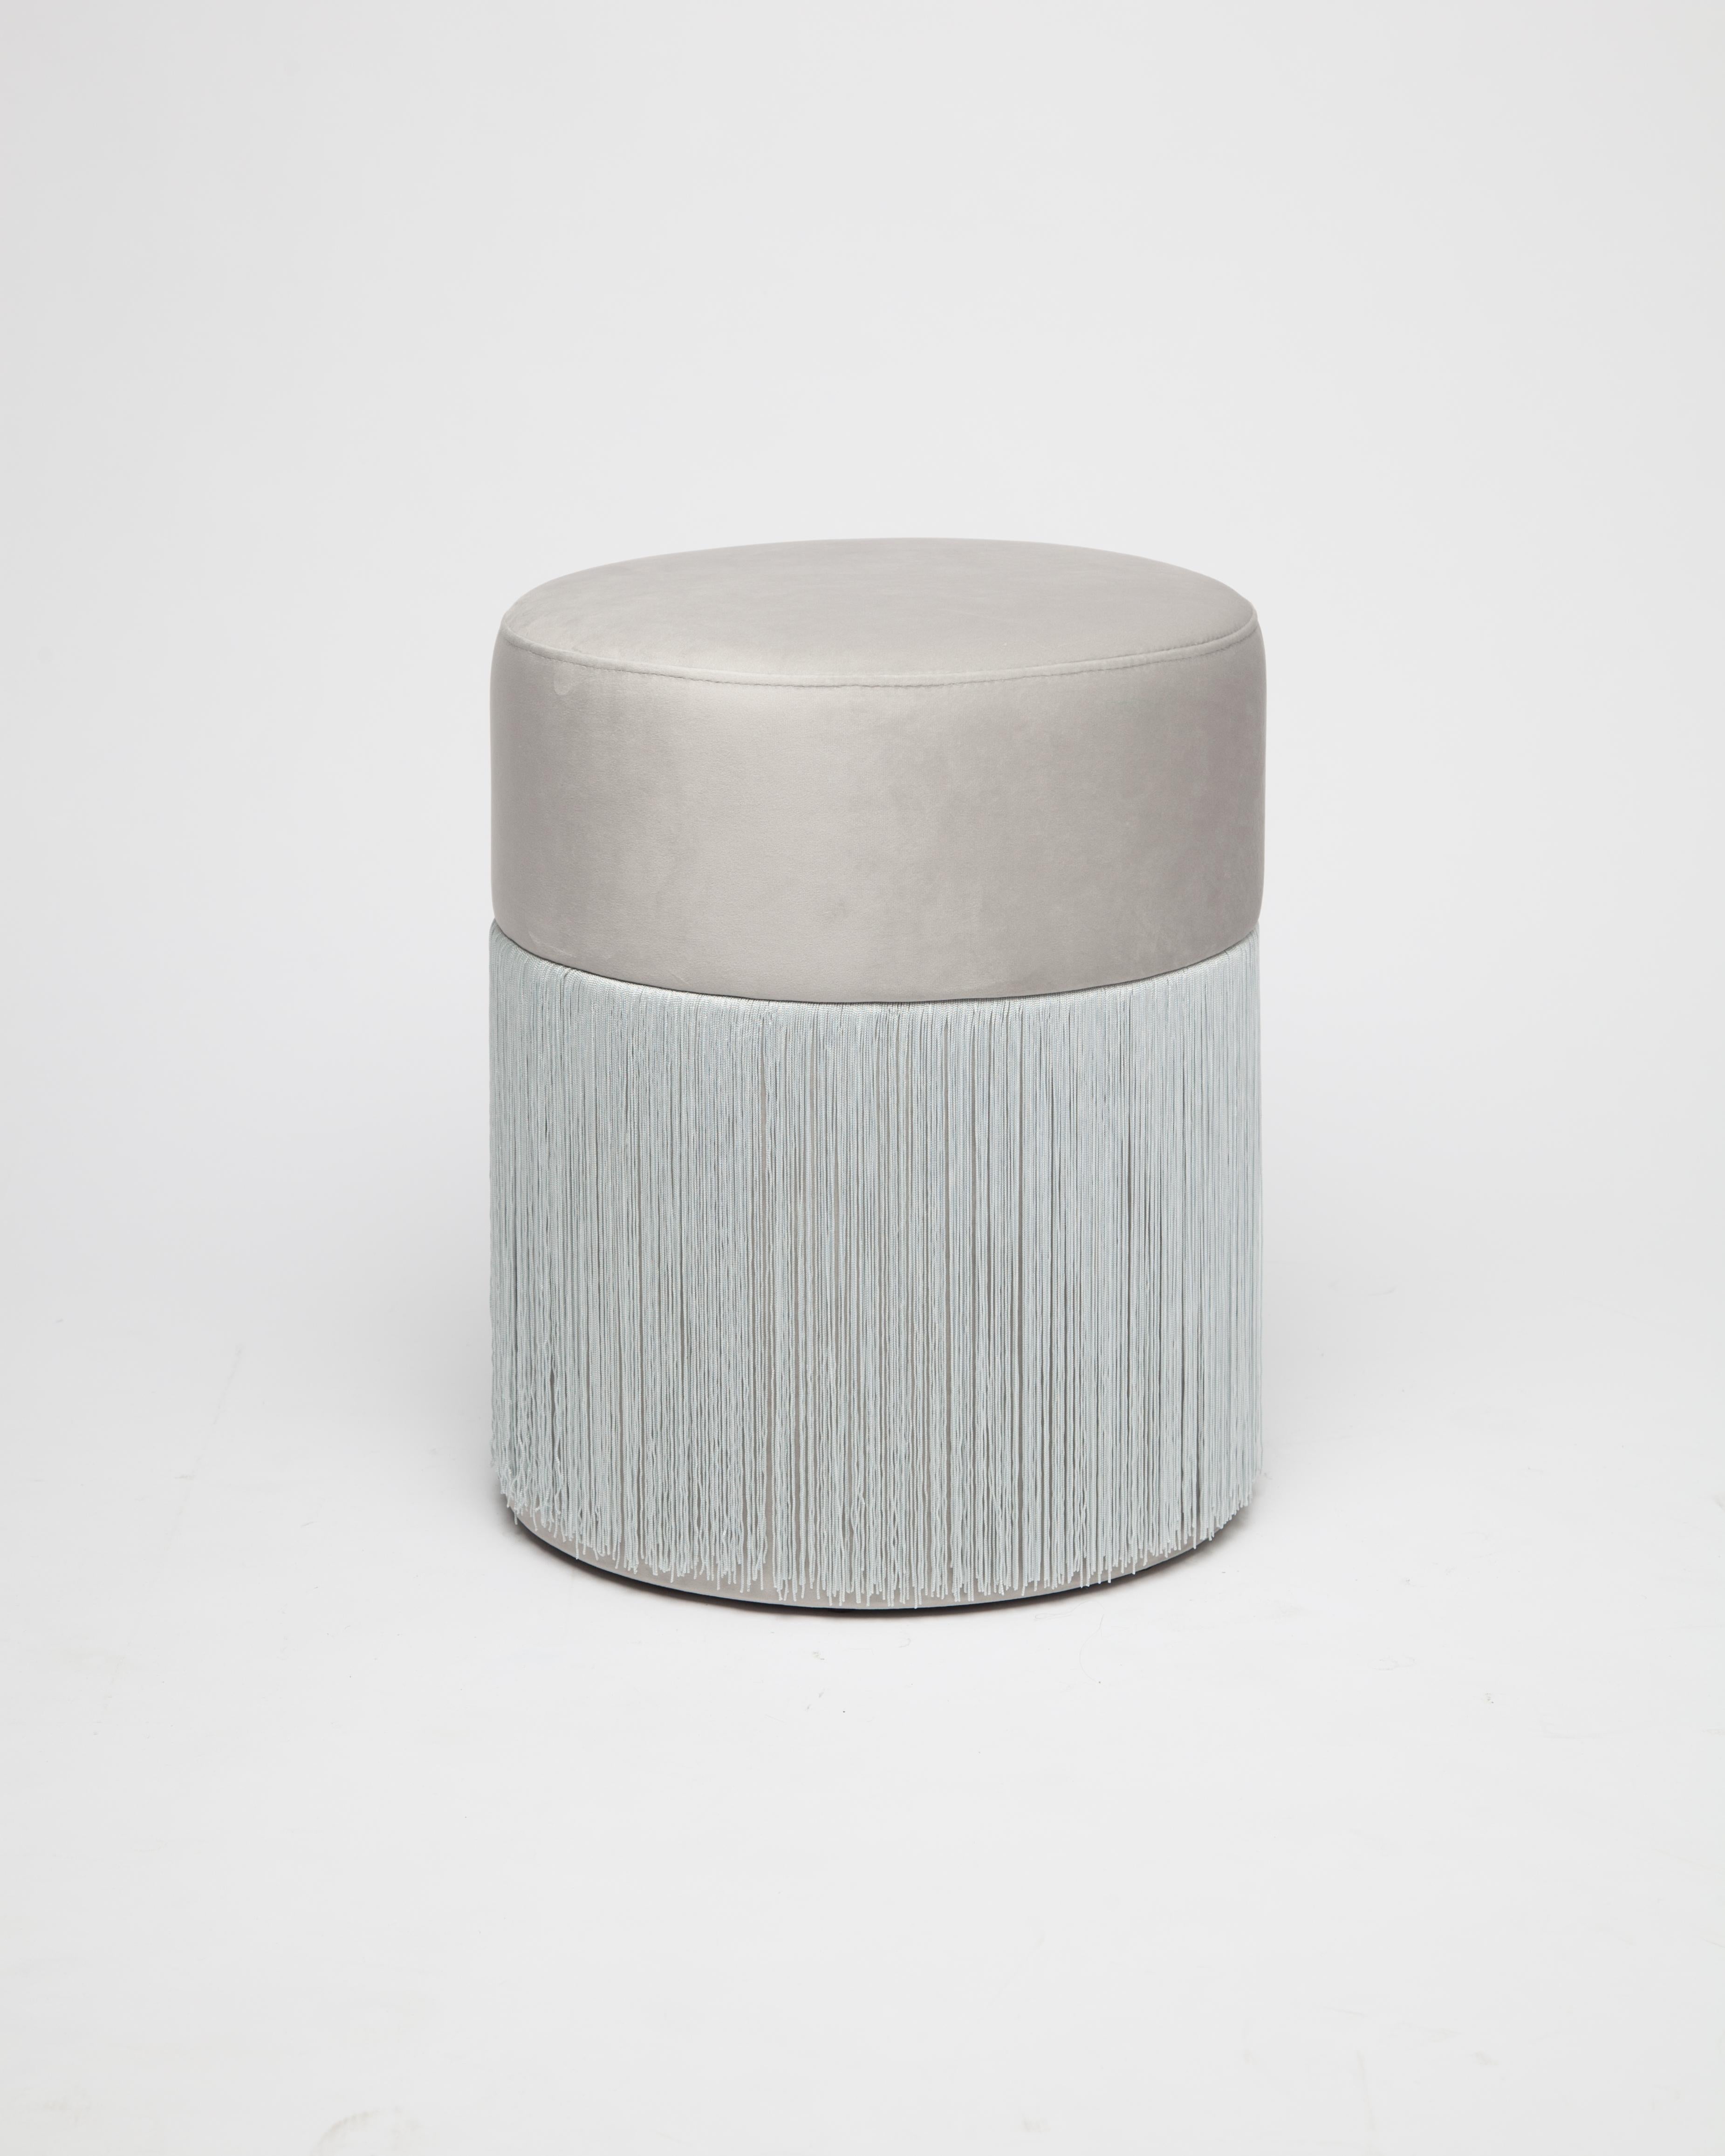 Spanish Pouf Pill S by Houtique